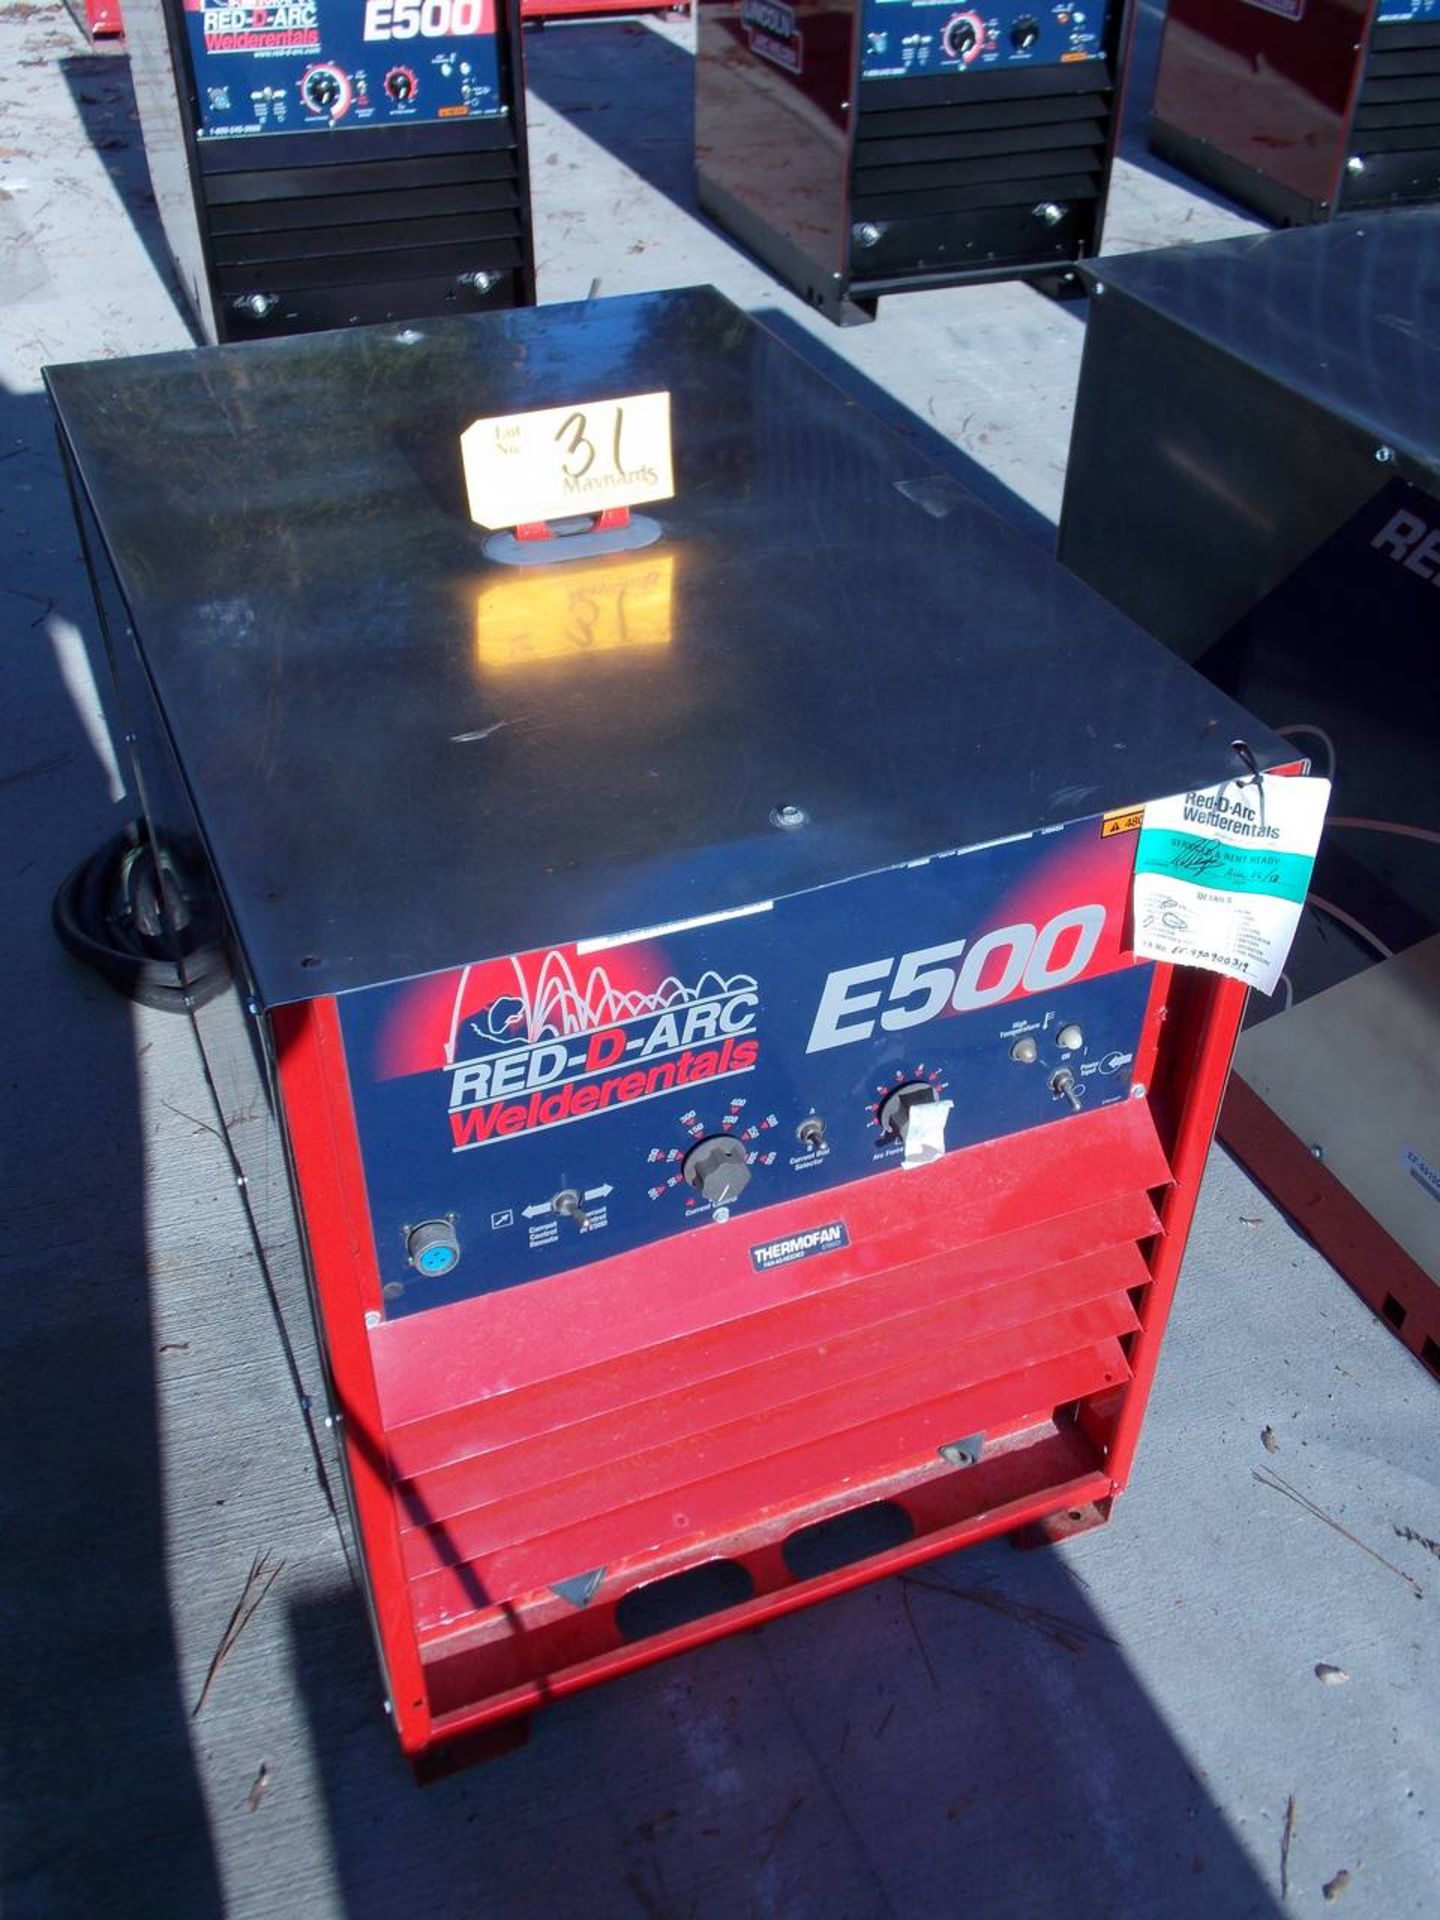 1999 Lincoln Electric RLK1286 E500 electric welder, stainless steel panels (R3R500)